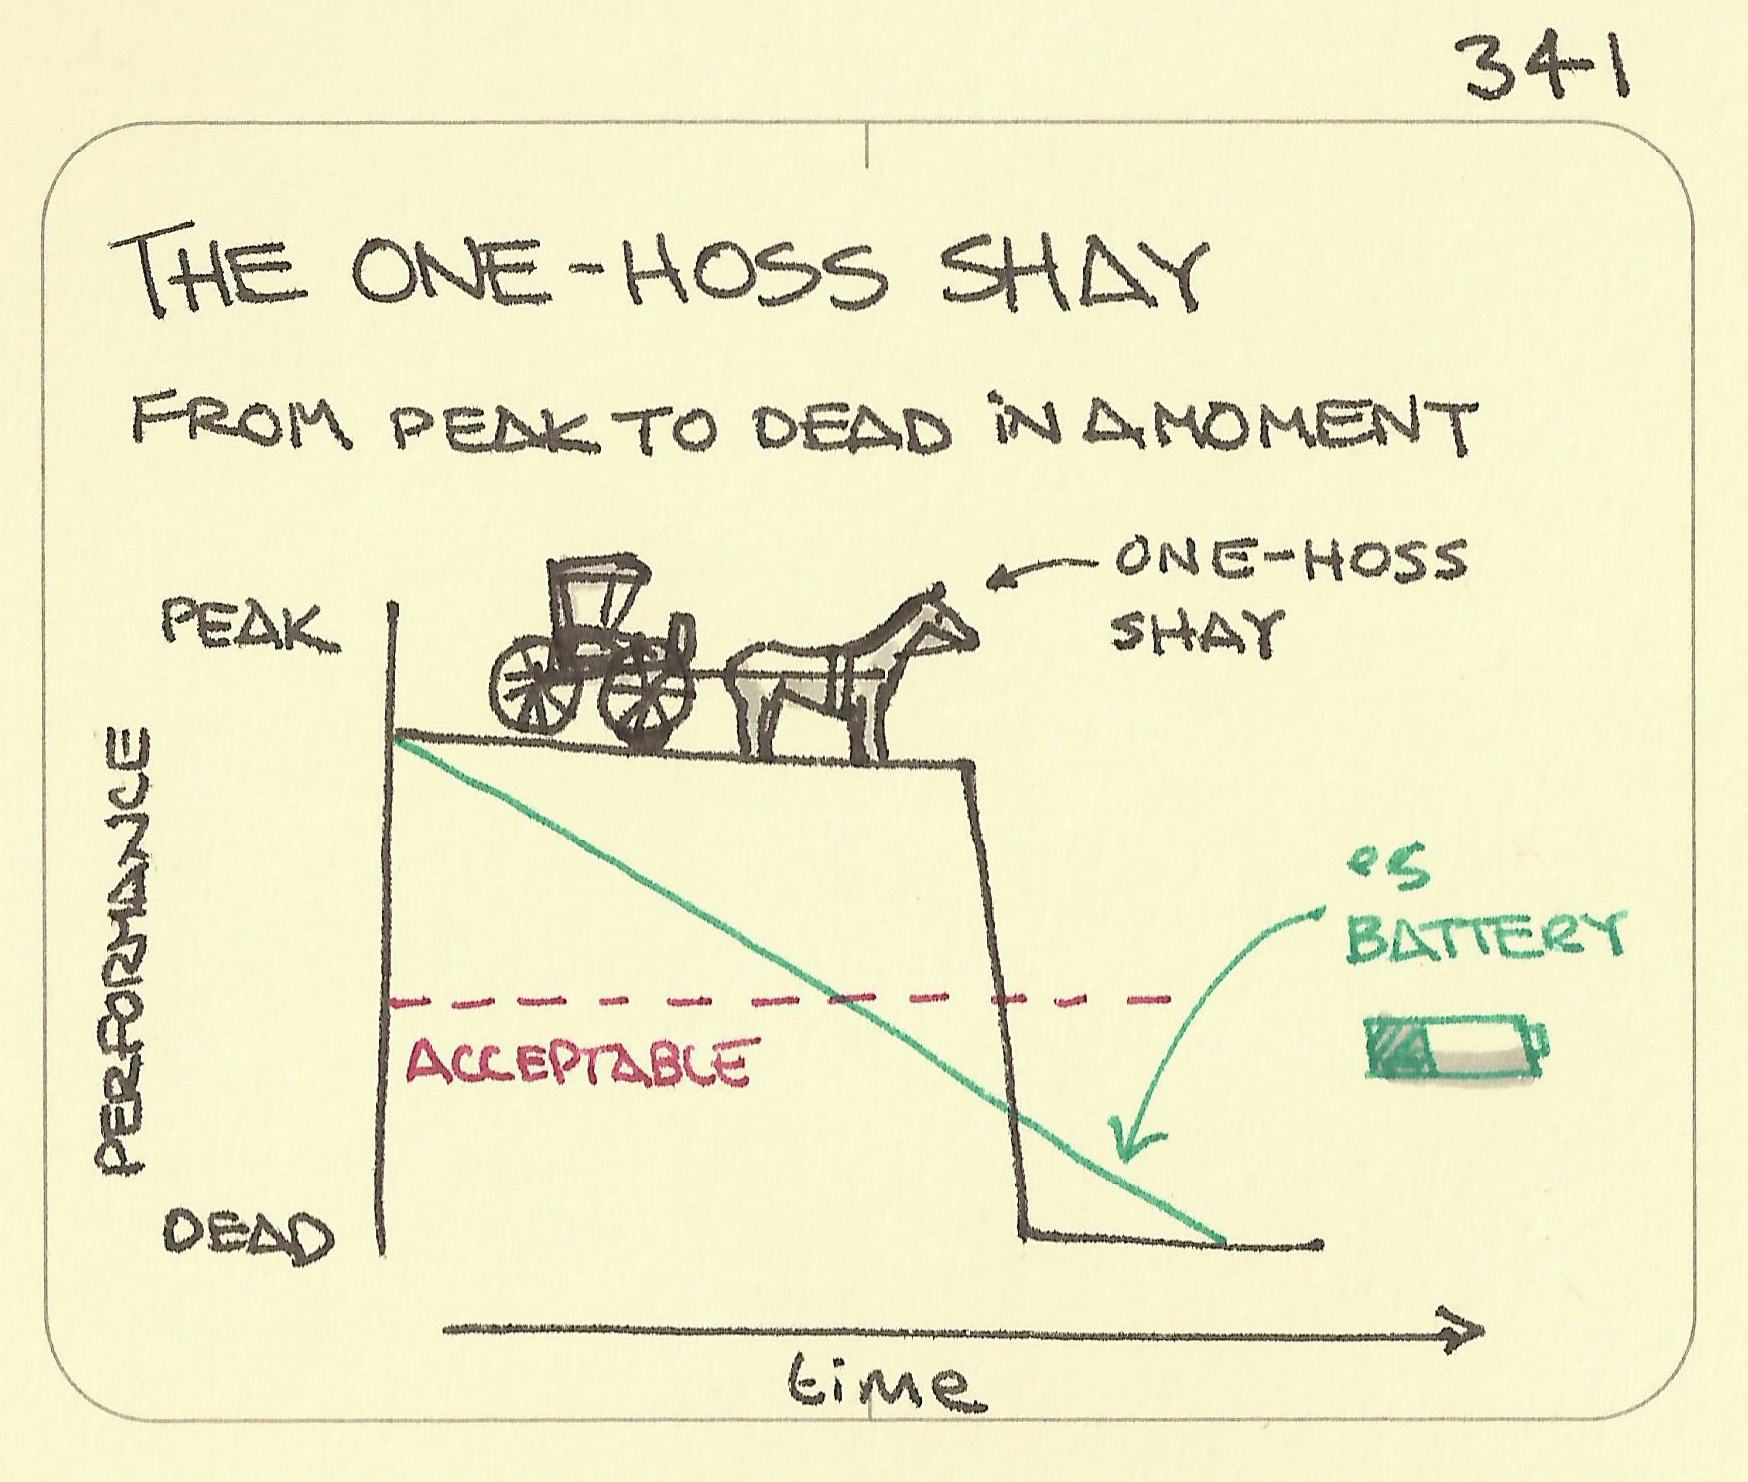 The one-hoss shay - Sketchplanations